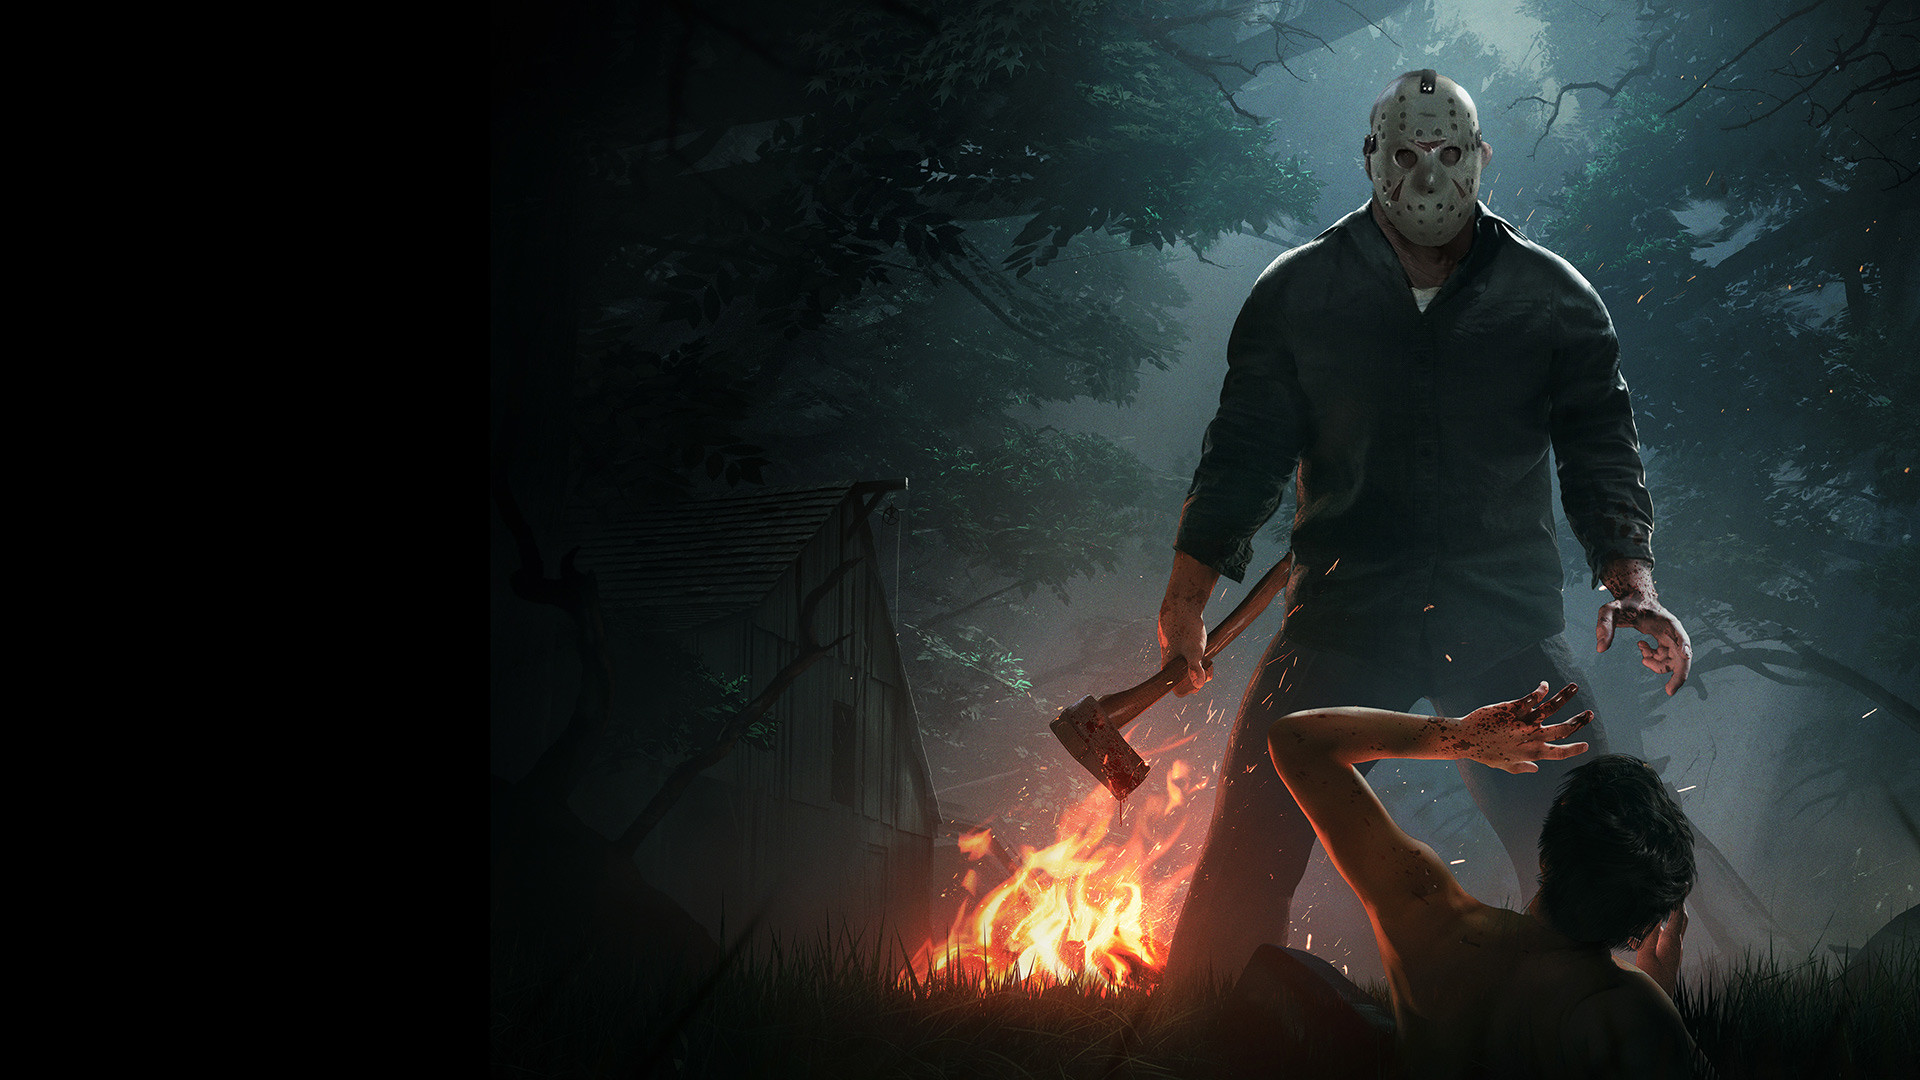 Dont scream The new Friday the 13th game is out today – Daily Tech Whip Daily Tech Whip